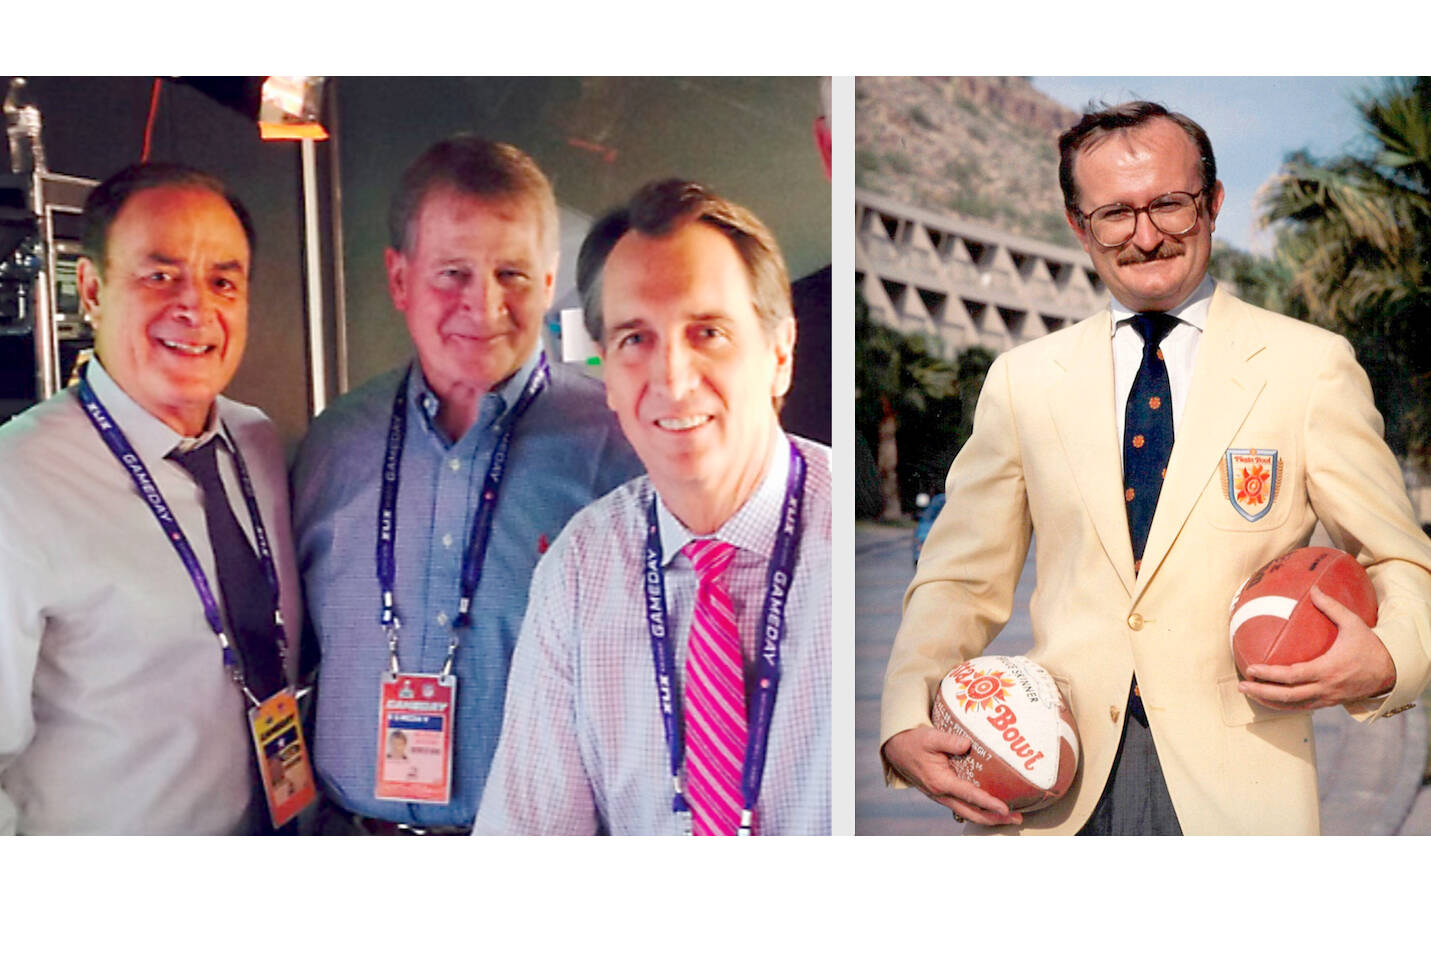 Port Angeles’ George Hill worked with NFL broadcasters such as Al Michaels and Cris Collinsworth, while Bruce Skinner, right, was instrumental in helping to turn the Fiesta Bowl into a major New Year’s Day bowl game.